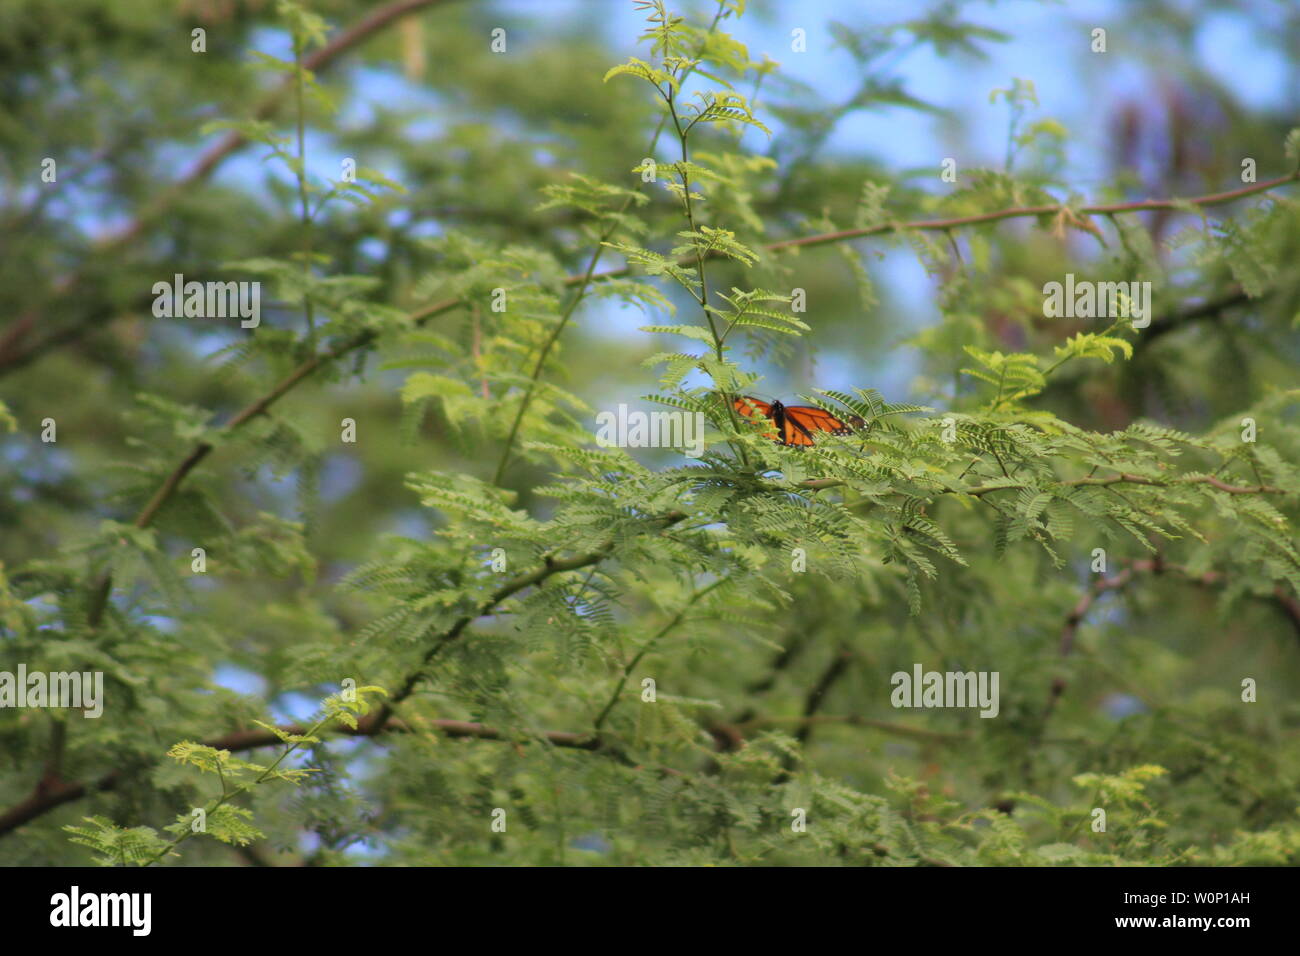 Monarch Butterfly in a tree in Hawaii on the island of Oahu. Stock Photo